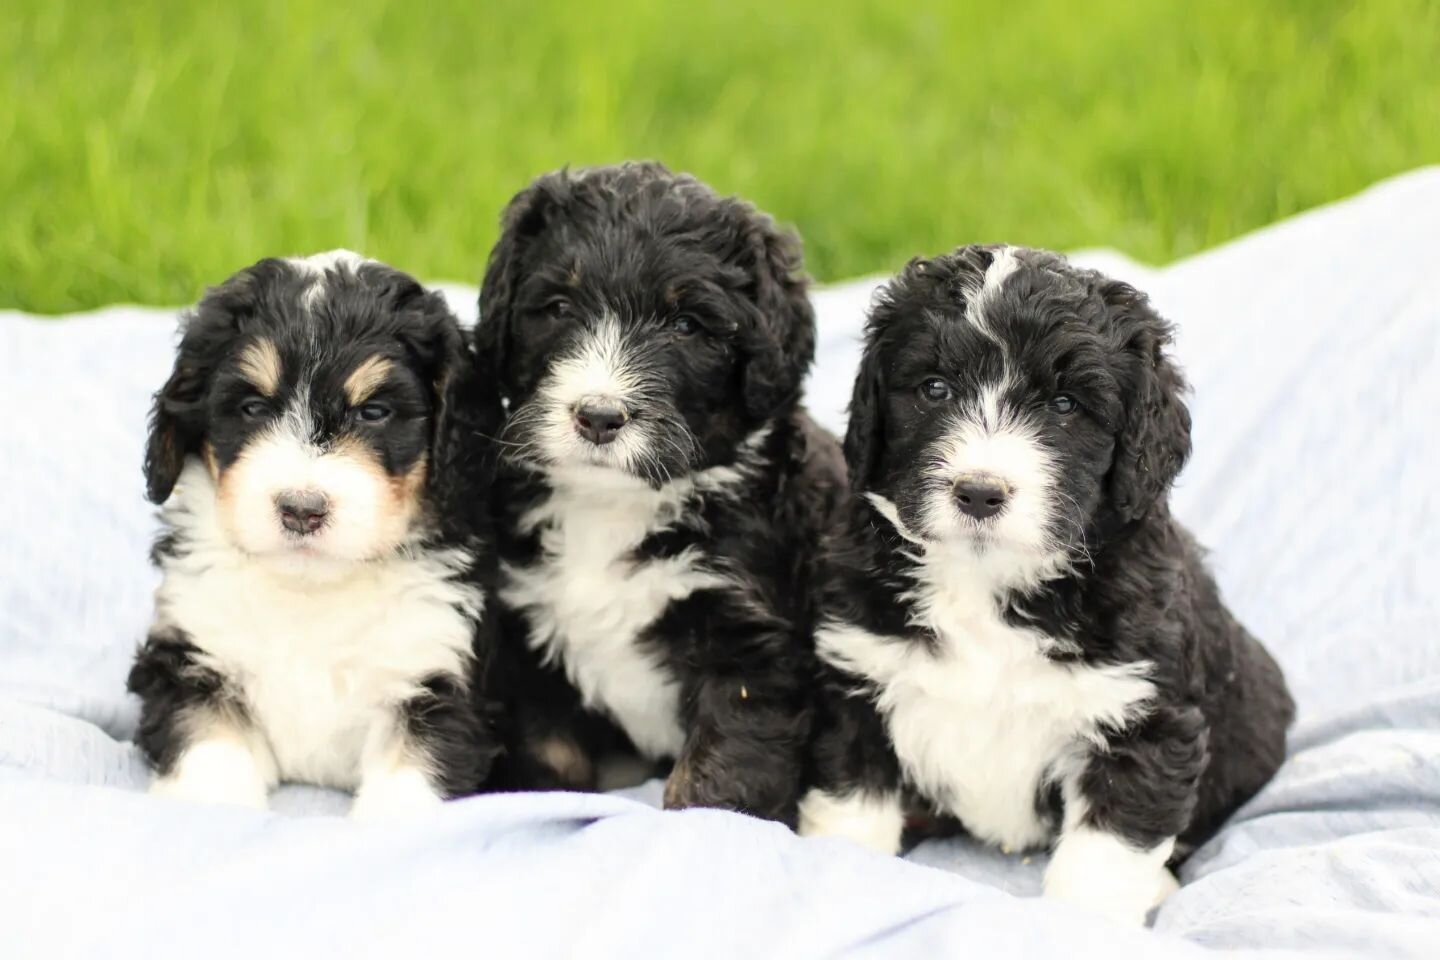 Finally figuring out this whole puppy thing 🐾

#haystackmountain #haystackbernedoodles  #bernedoodle #coloradobernedoodle #bernedoodlesofinstagram  #doodlesofinstagram #doodlesoftheworld #dogsofinstagram #puppiesofinstagram #puppy #tricolorbernedood